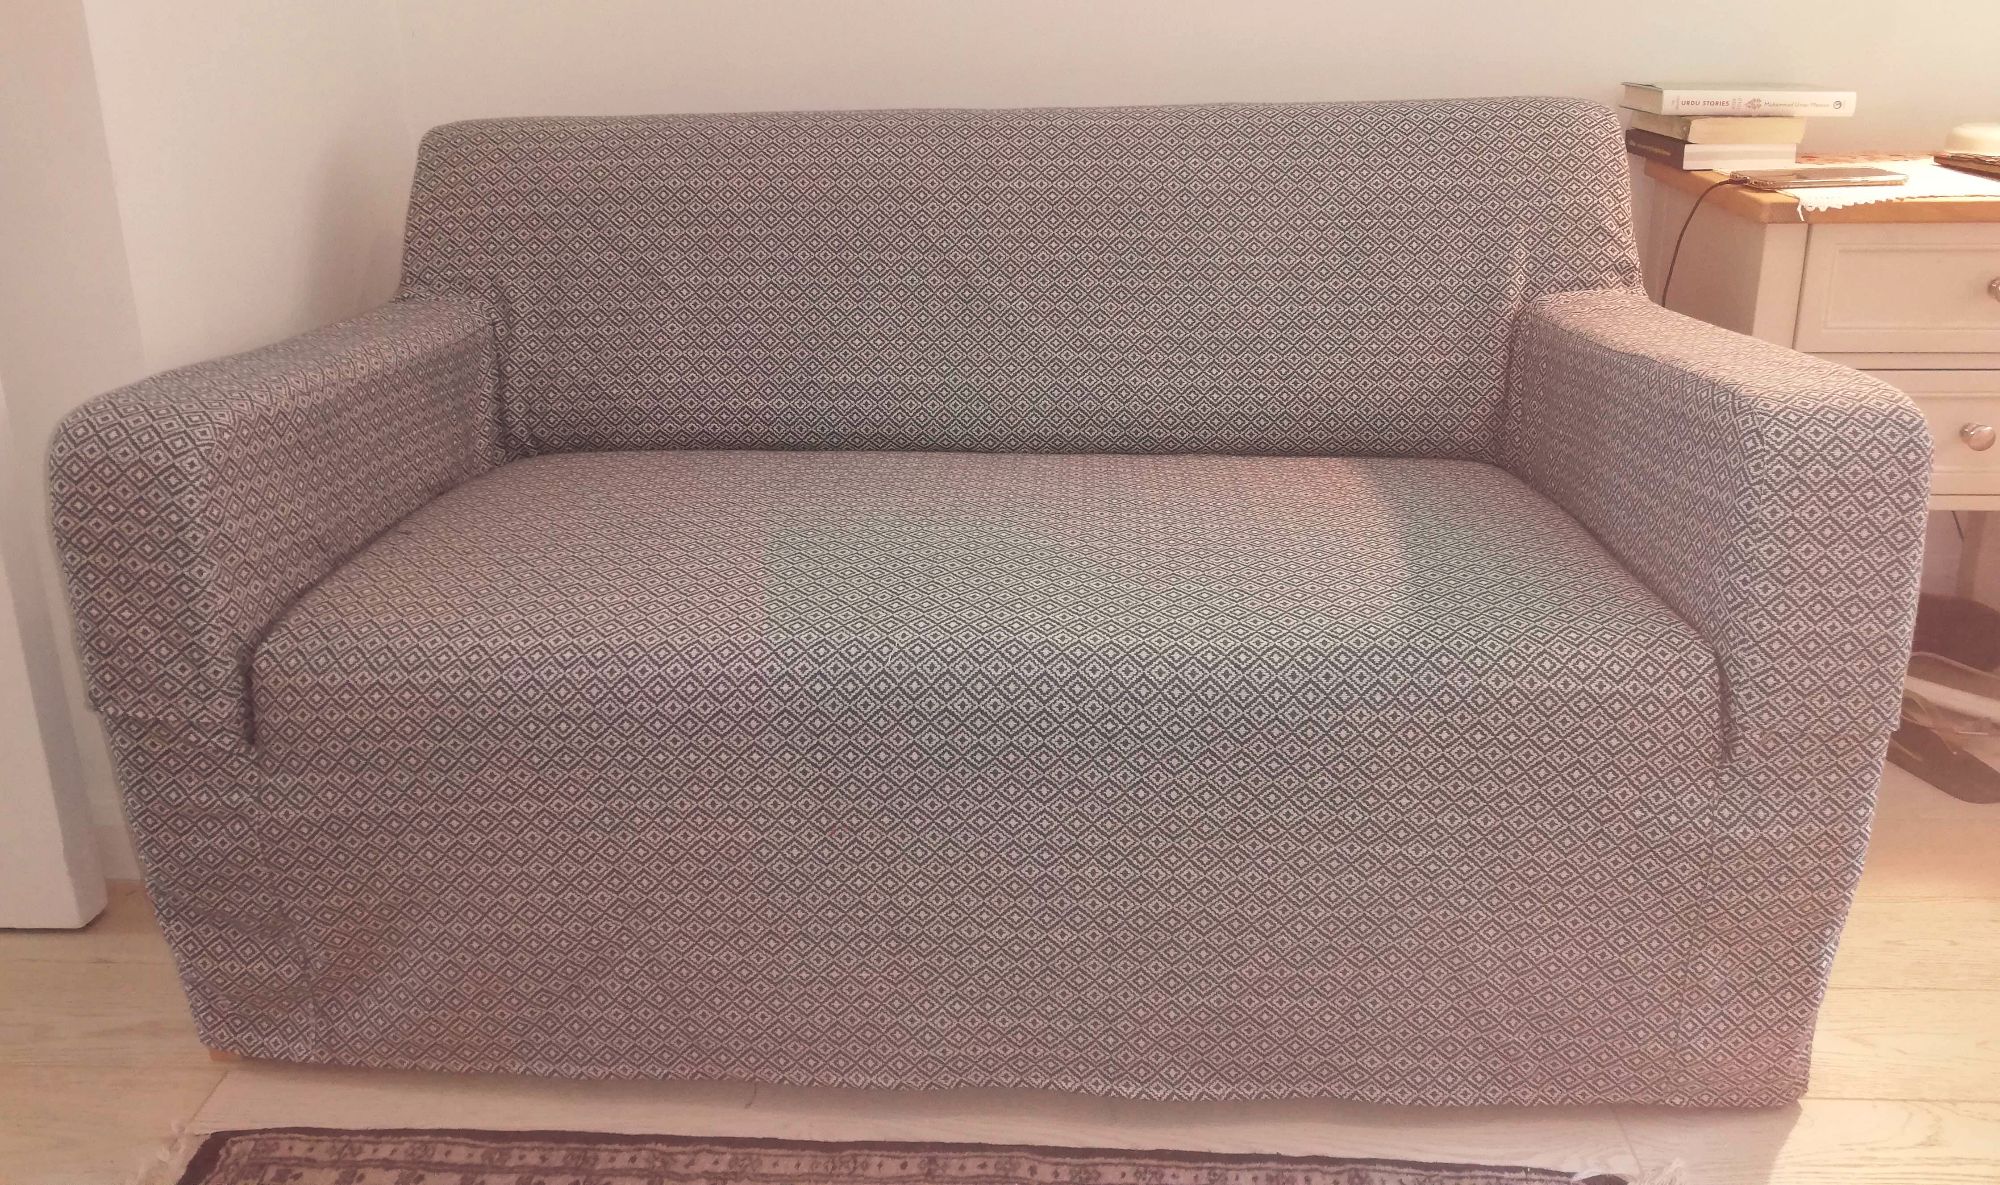 Patterned loose sofa cover